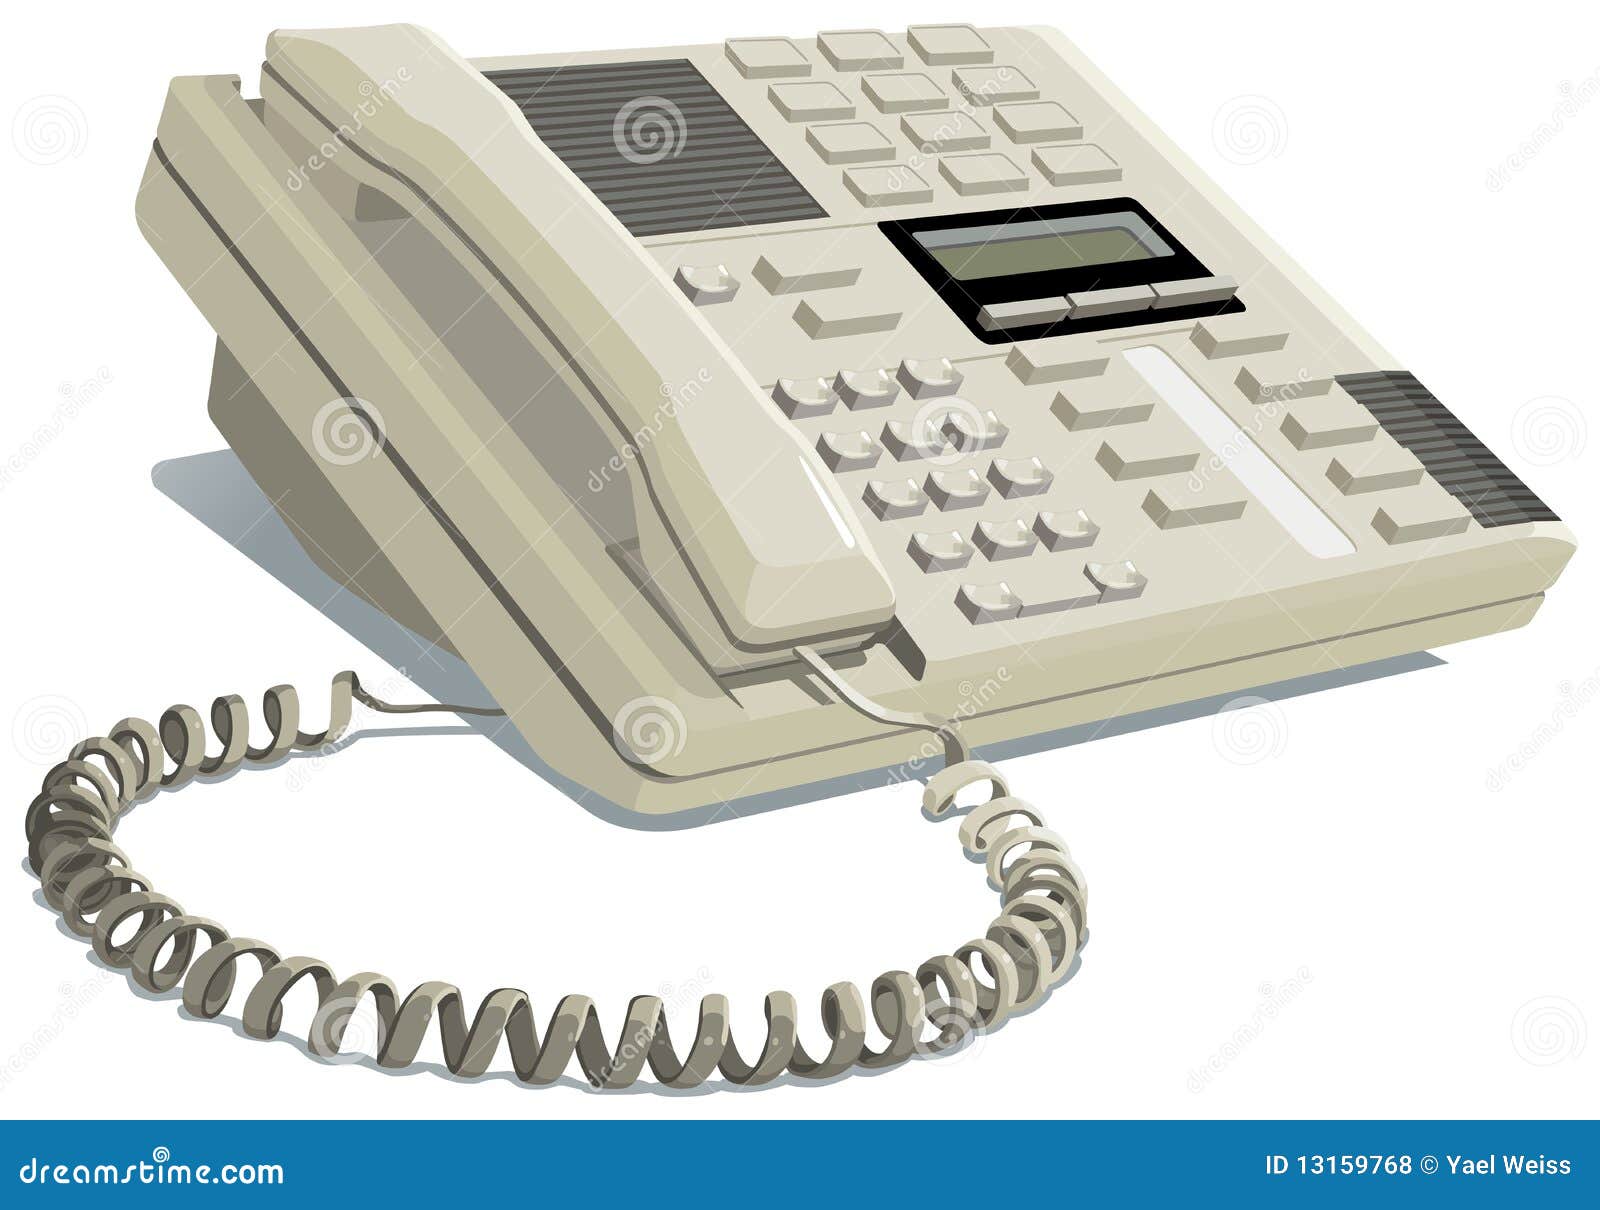 office phone clipart - photo #5